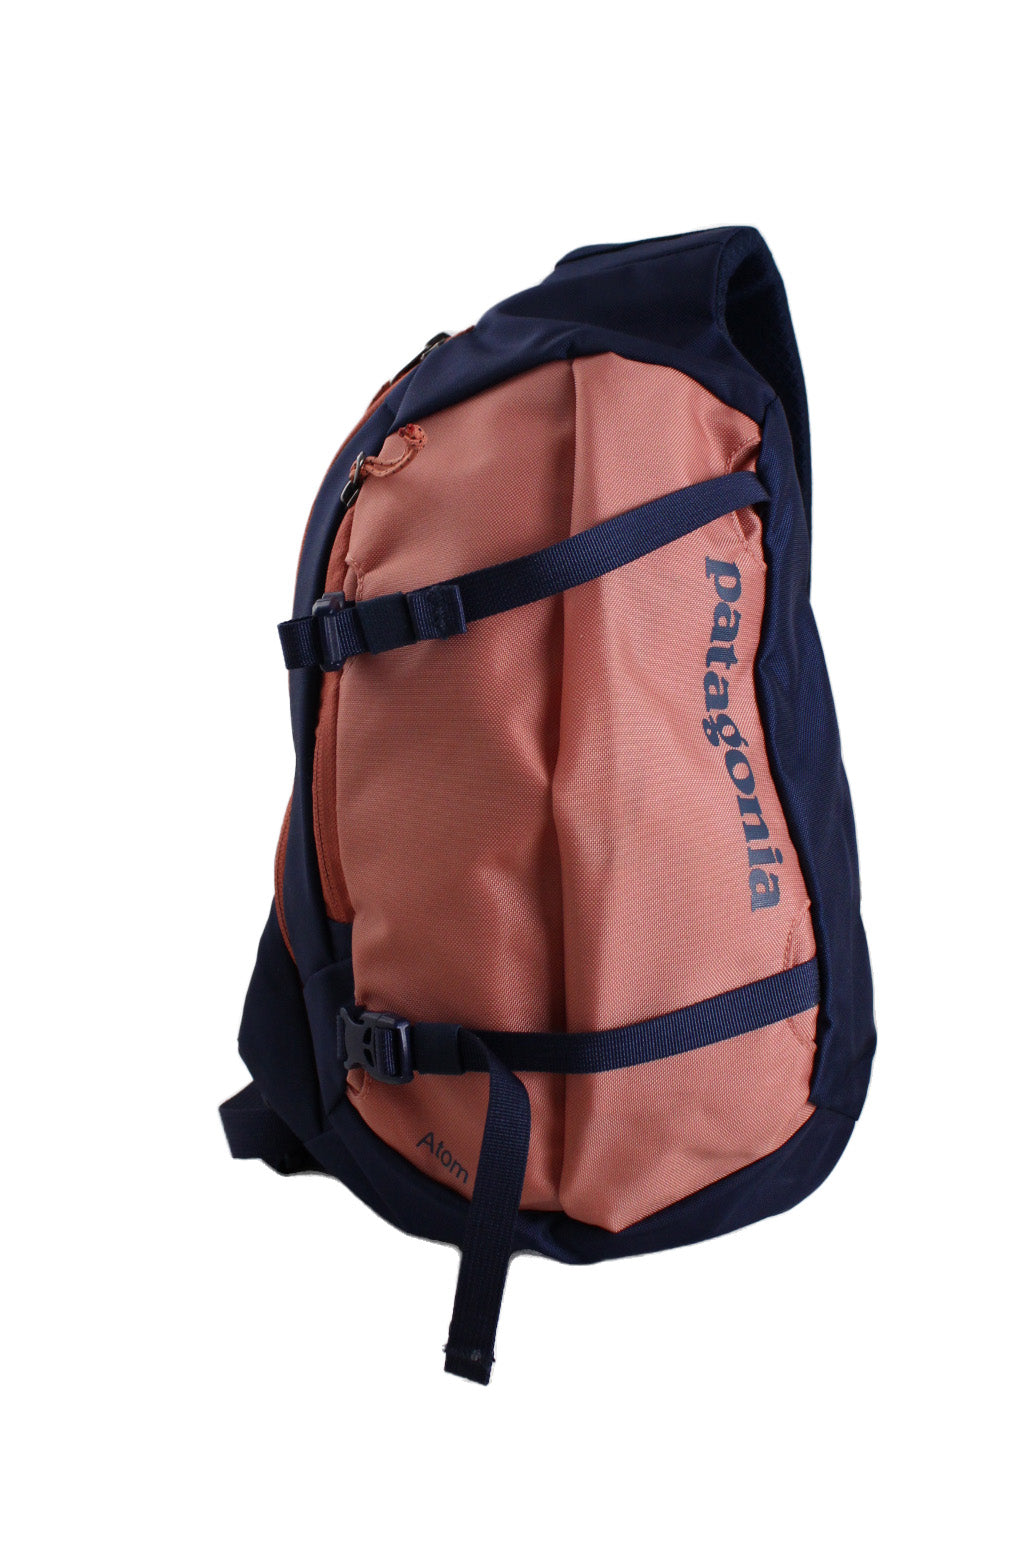 front view of patagonia navy/salmon ‘atom 8l sling’ bag. features side zip main compartment with padded slot pocket within, small side zip pocket with key ring within, double adjustable clasp straps at front, adjustable padded shoulder strap with zip pocket, and ‘patagonia’ logos printed at front, and logo tag at shoulder strap.